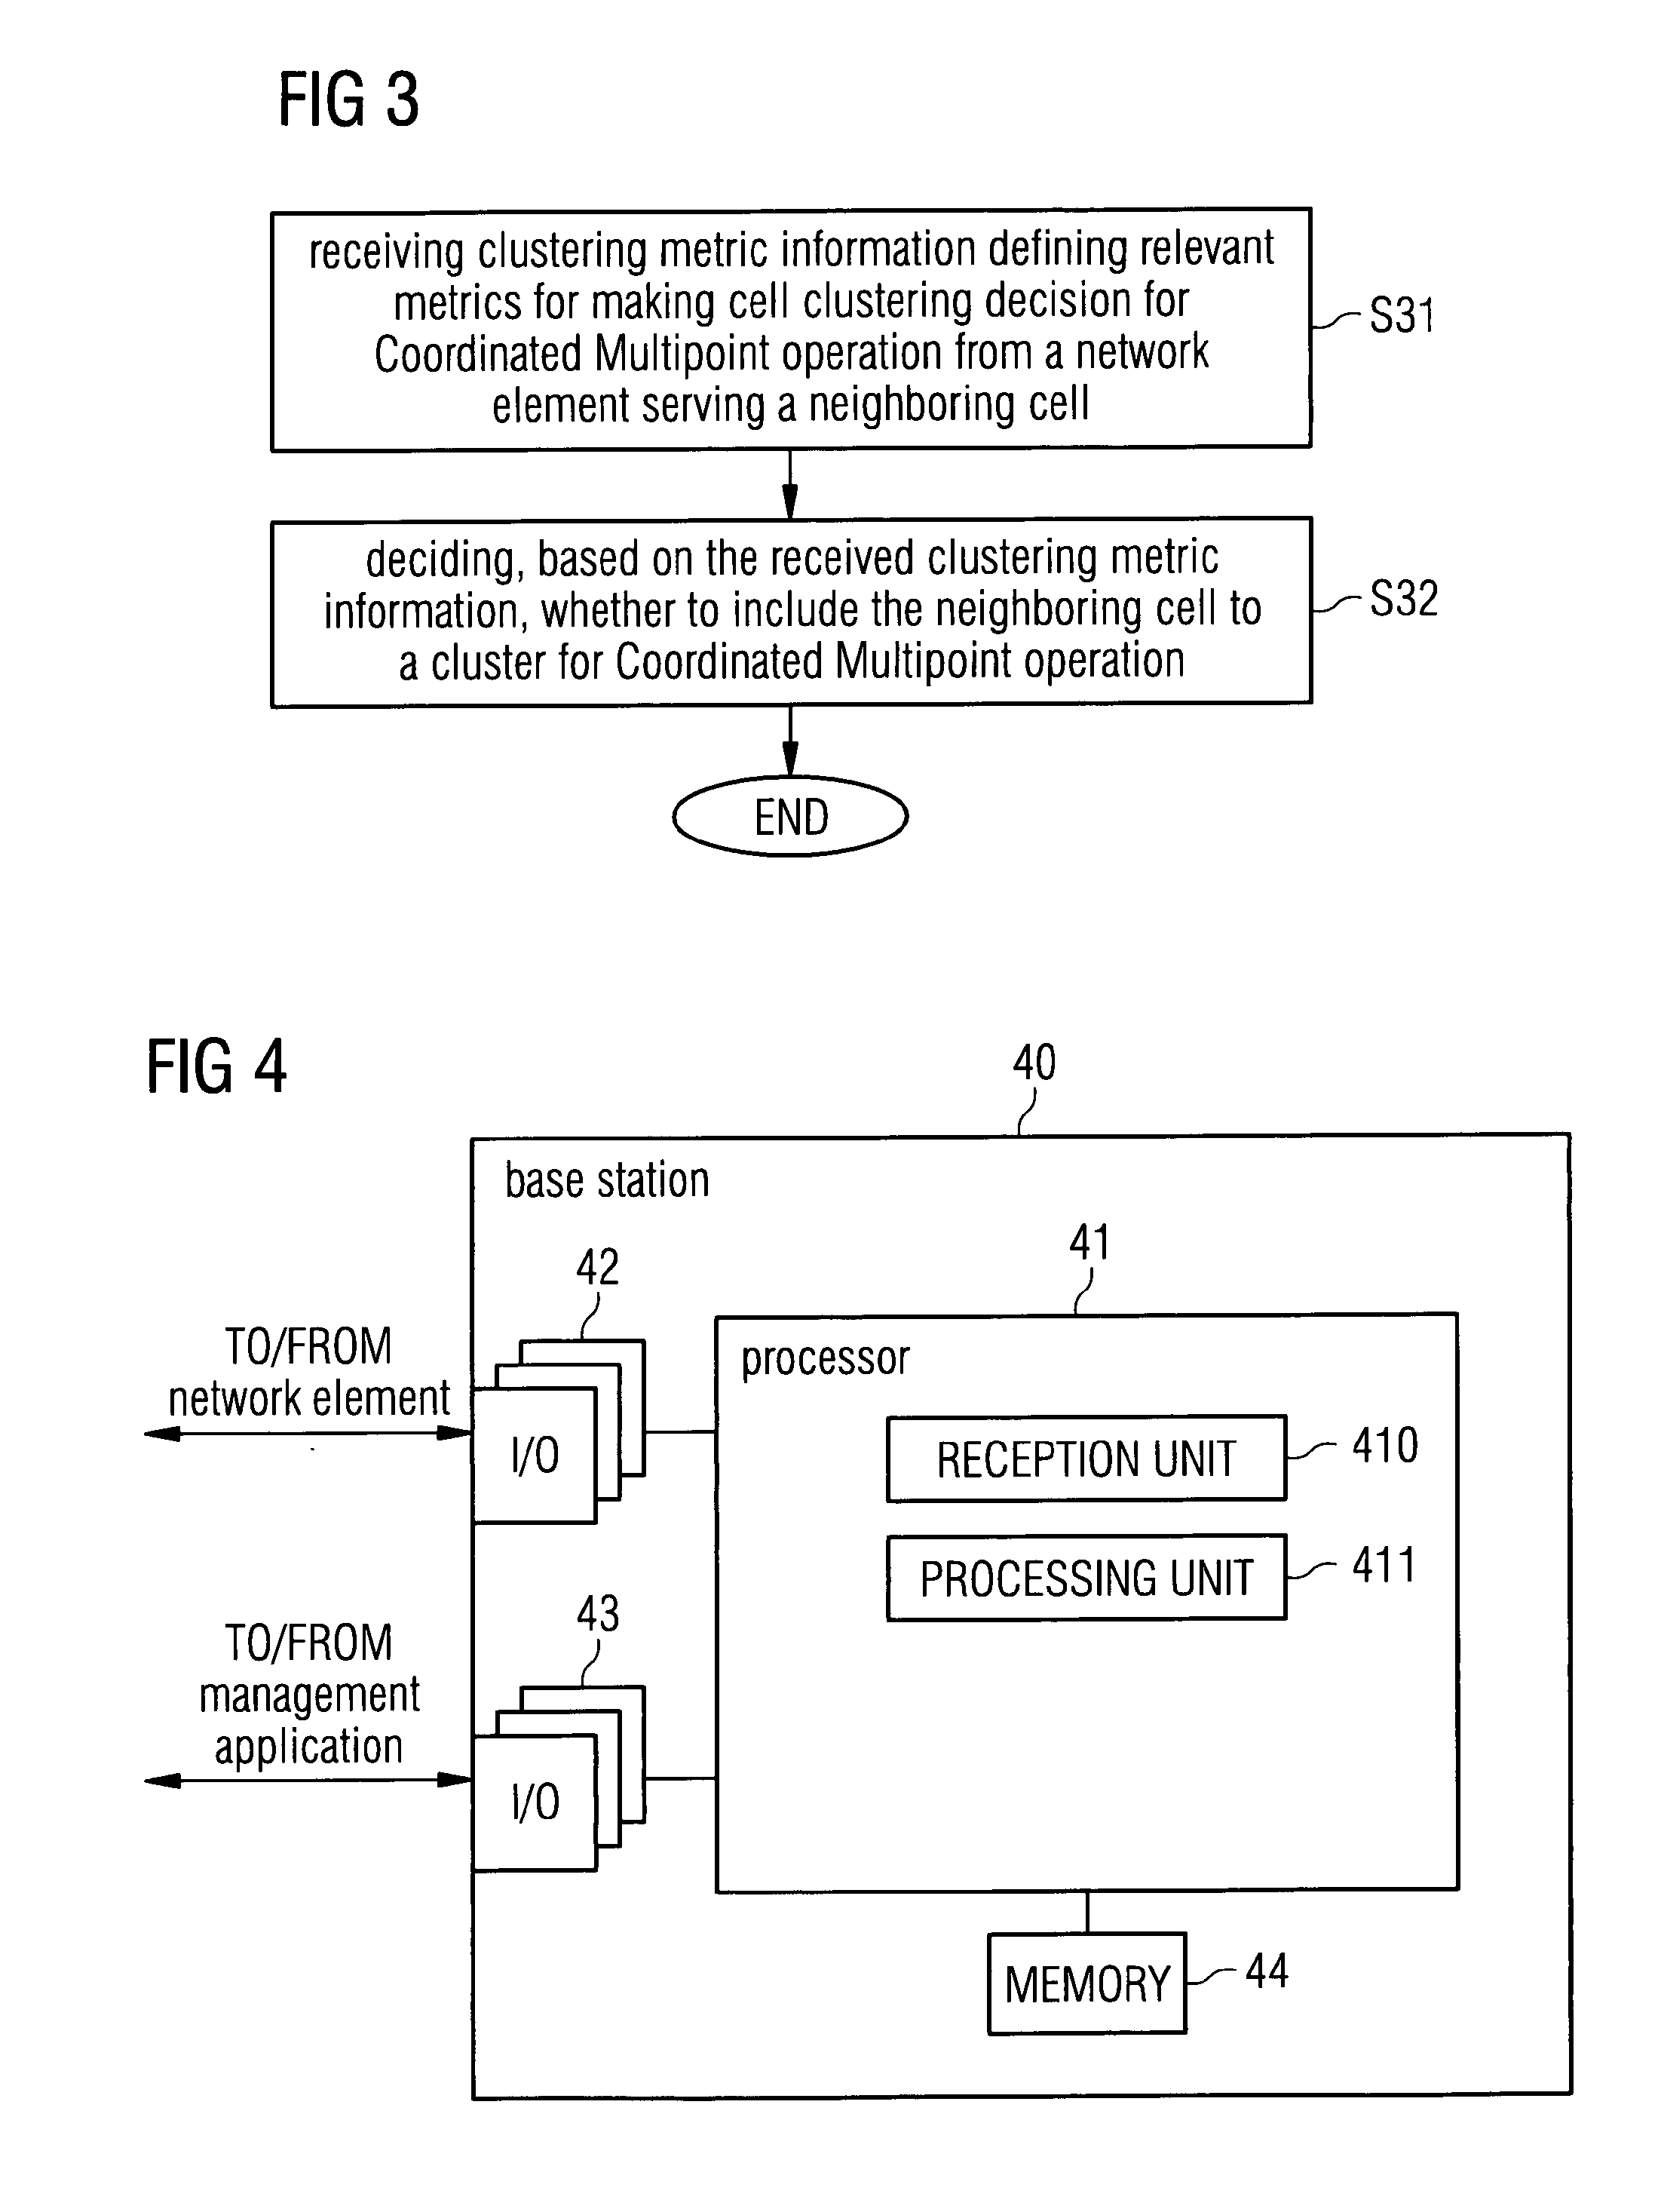 Dynamic cell clustering for coordinated multipoint operation